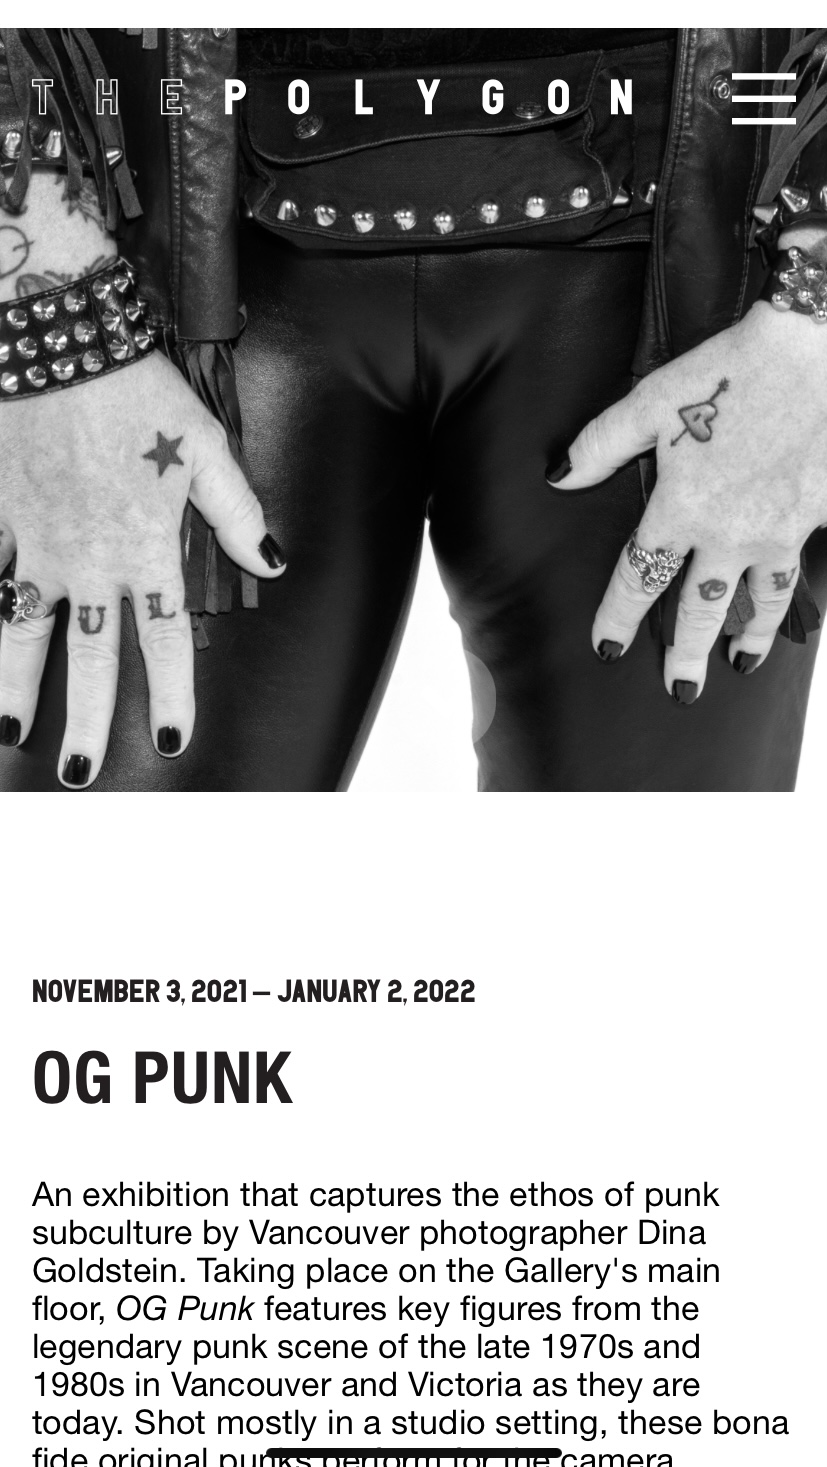 OG punk exhibition Vancouver Polygon Gallery